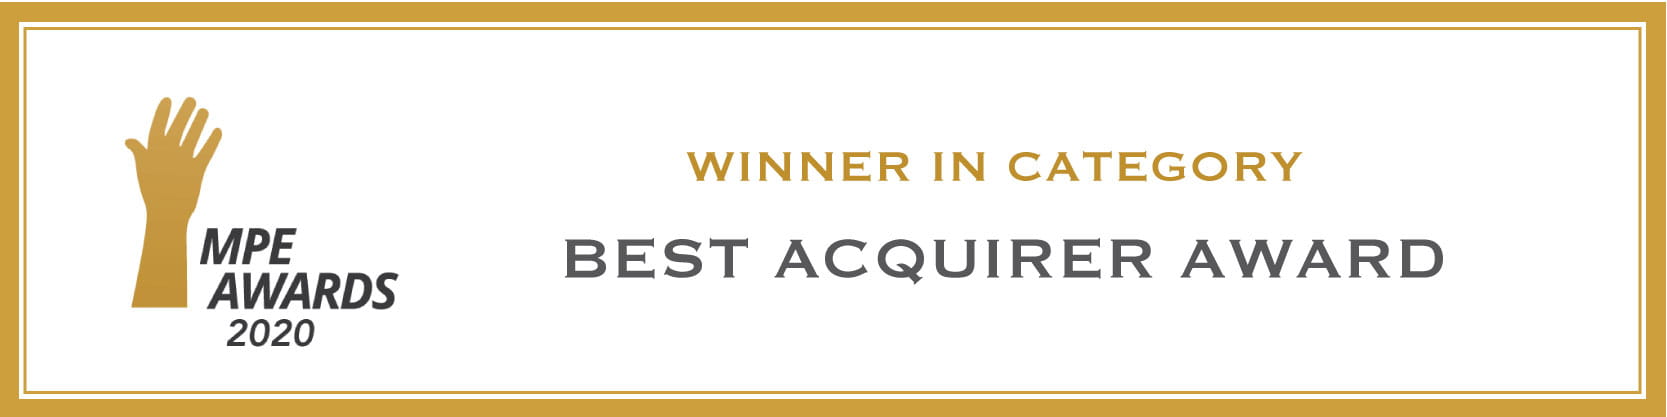 MPE Awards 2020 - Winners in category - BEST ACQUIRER AWARD